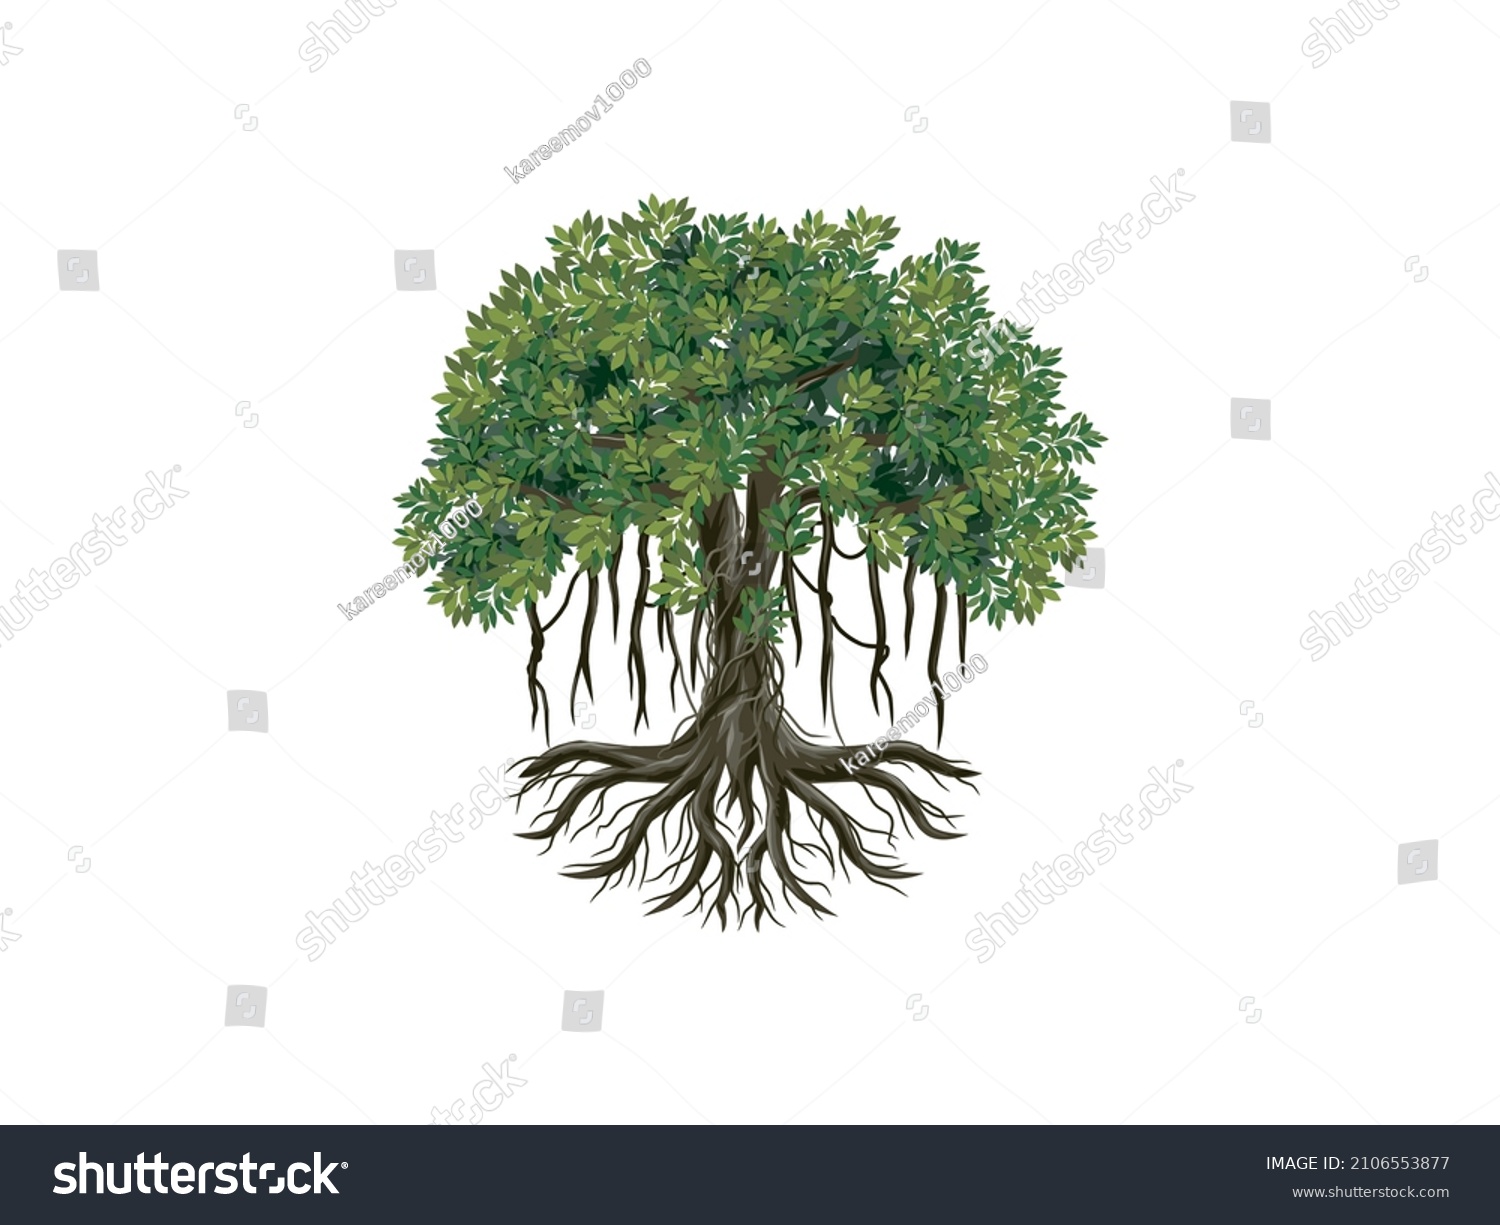 SVG of Ancient Banyan tree vector illustrations, hand drawn art isolated on white. svg